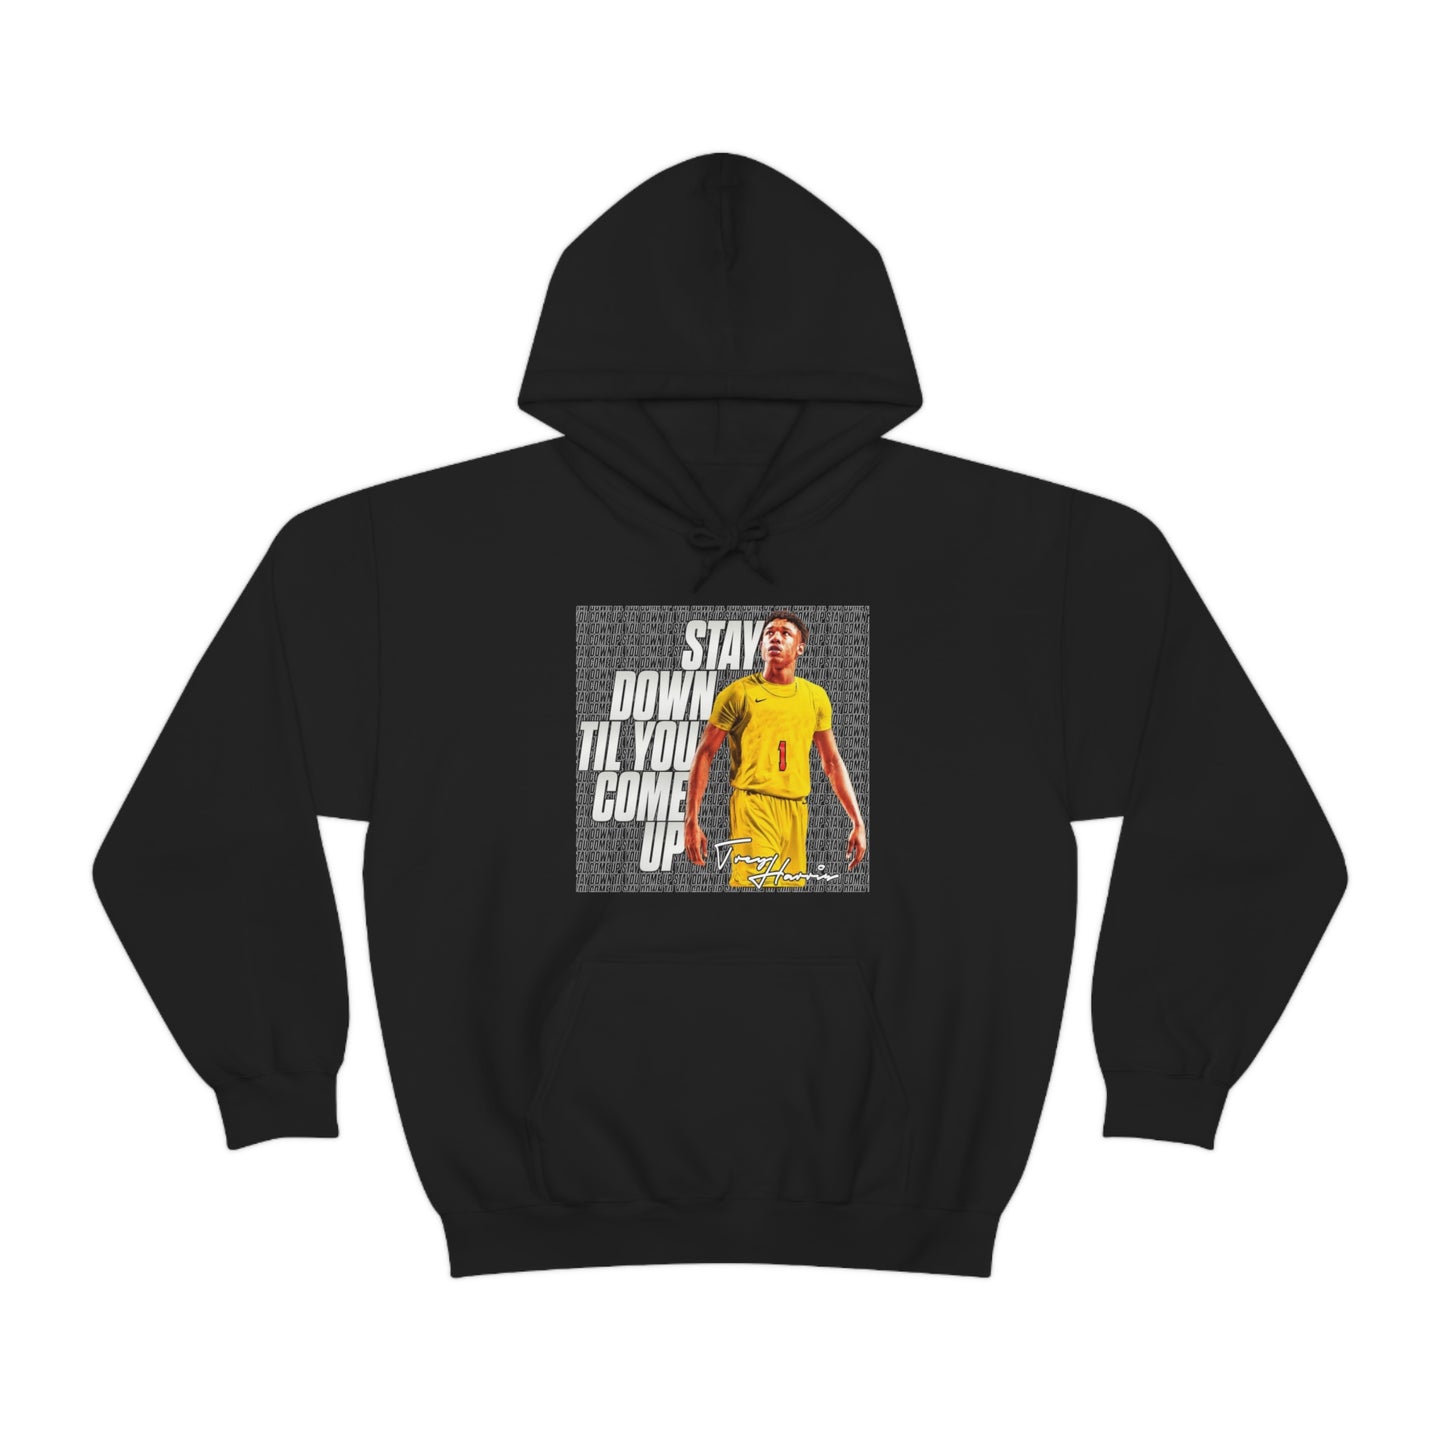 Trey Harris: Stay Down Til You Come Up Hoodie